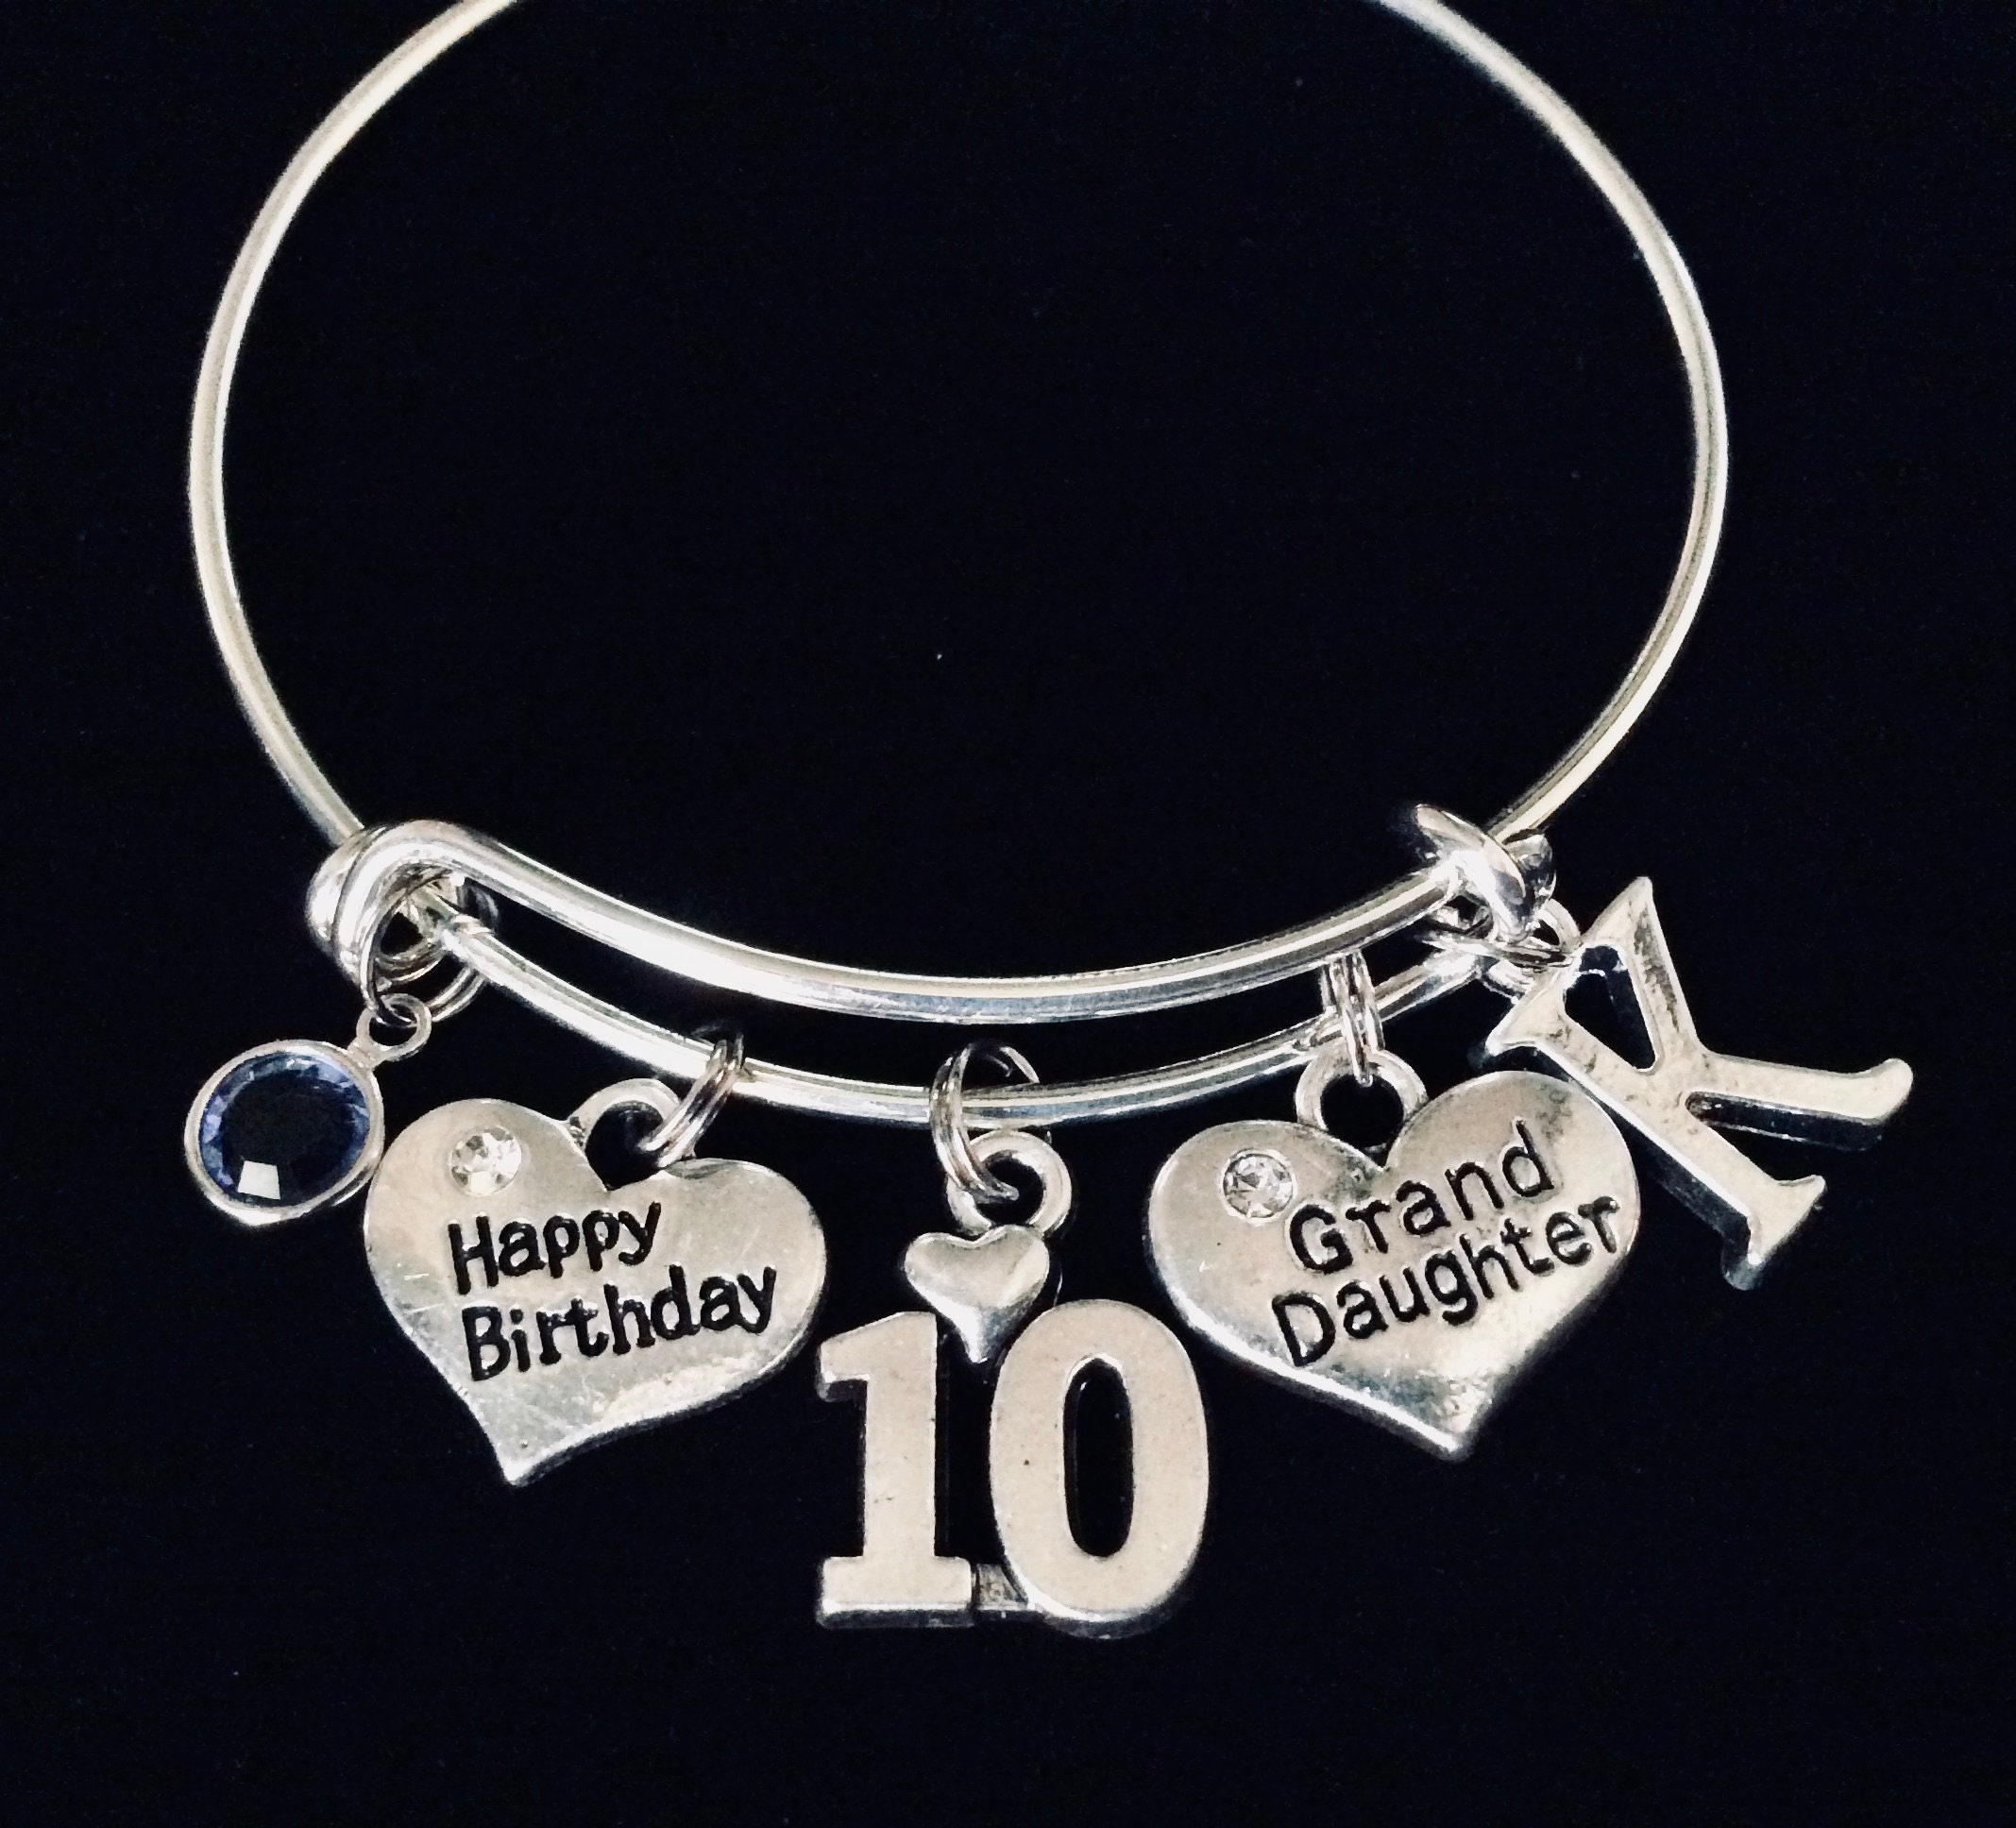 Personalized Birthday Gift for 10 Year Old Girl, Handmade Jewelry, Silver  Charm Bracelet for Child, 10th Birthday Gift, Daughter From Mom 